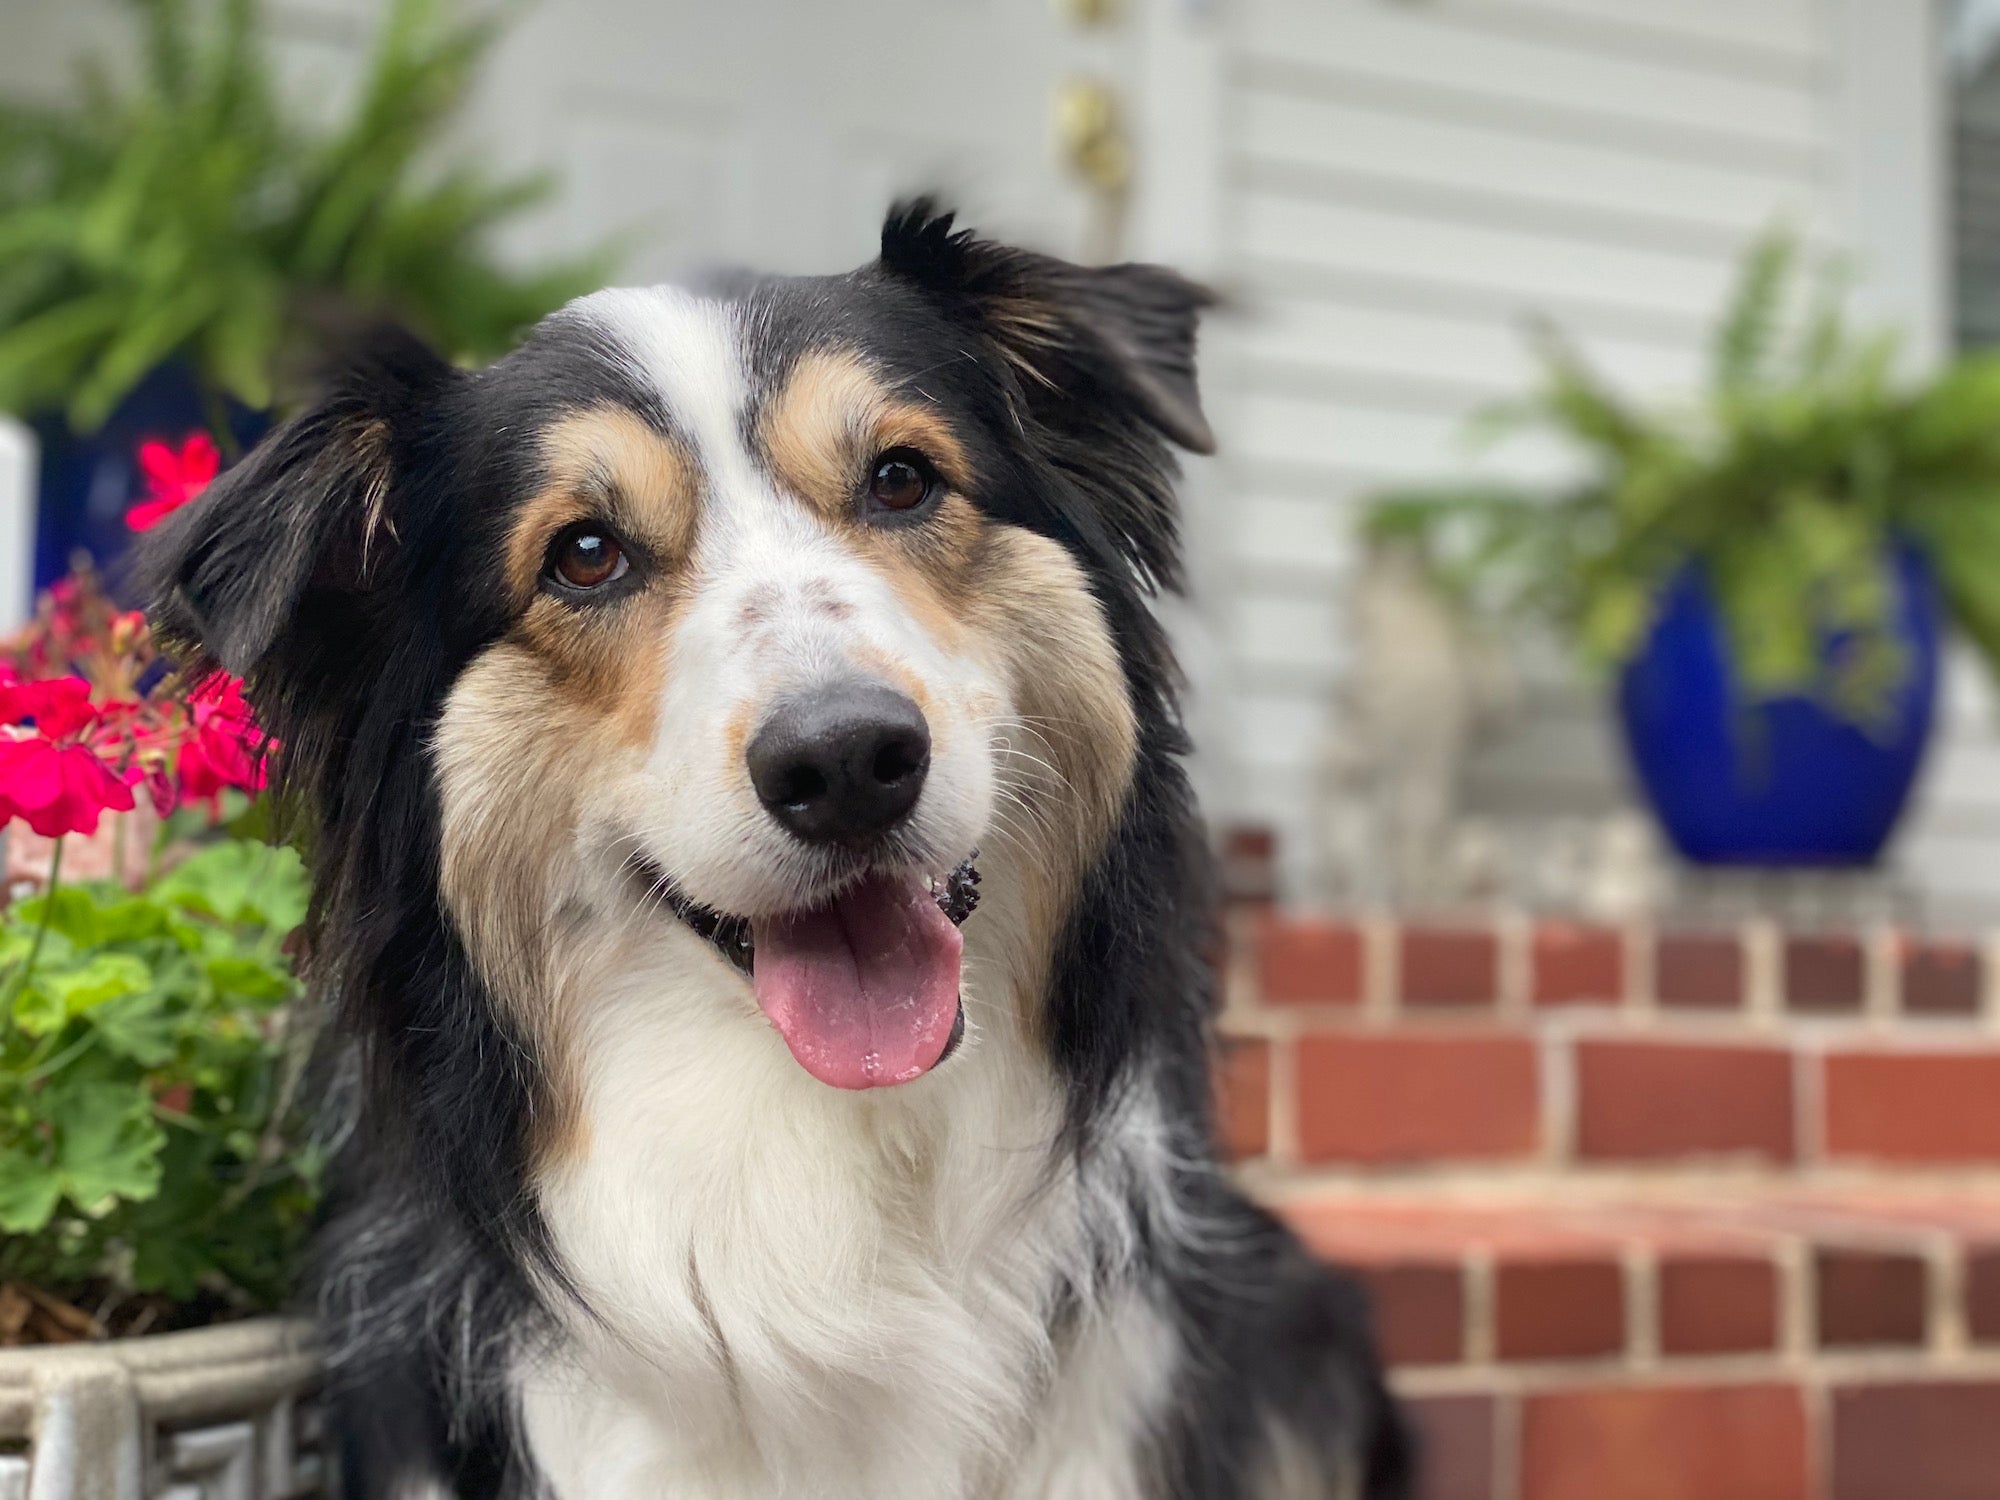 This Australian Shepherd suffered from motion sickness when she went for car rides as a puppy. Dog’s symptoms of nausea include excessive drooling, burping, heaving, vomiting and dizziness. The Uh-Oh Kit's Quell Queasiness stopped her nausea in its tracks